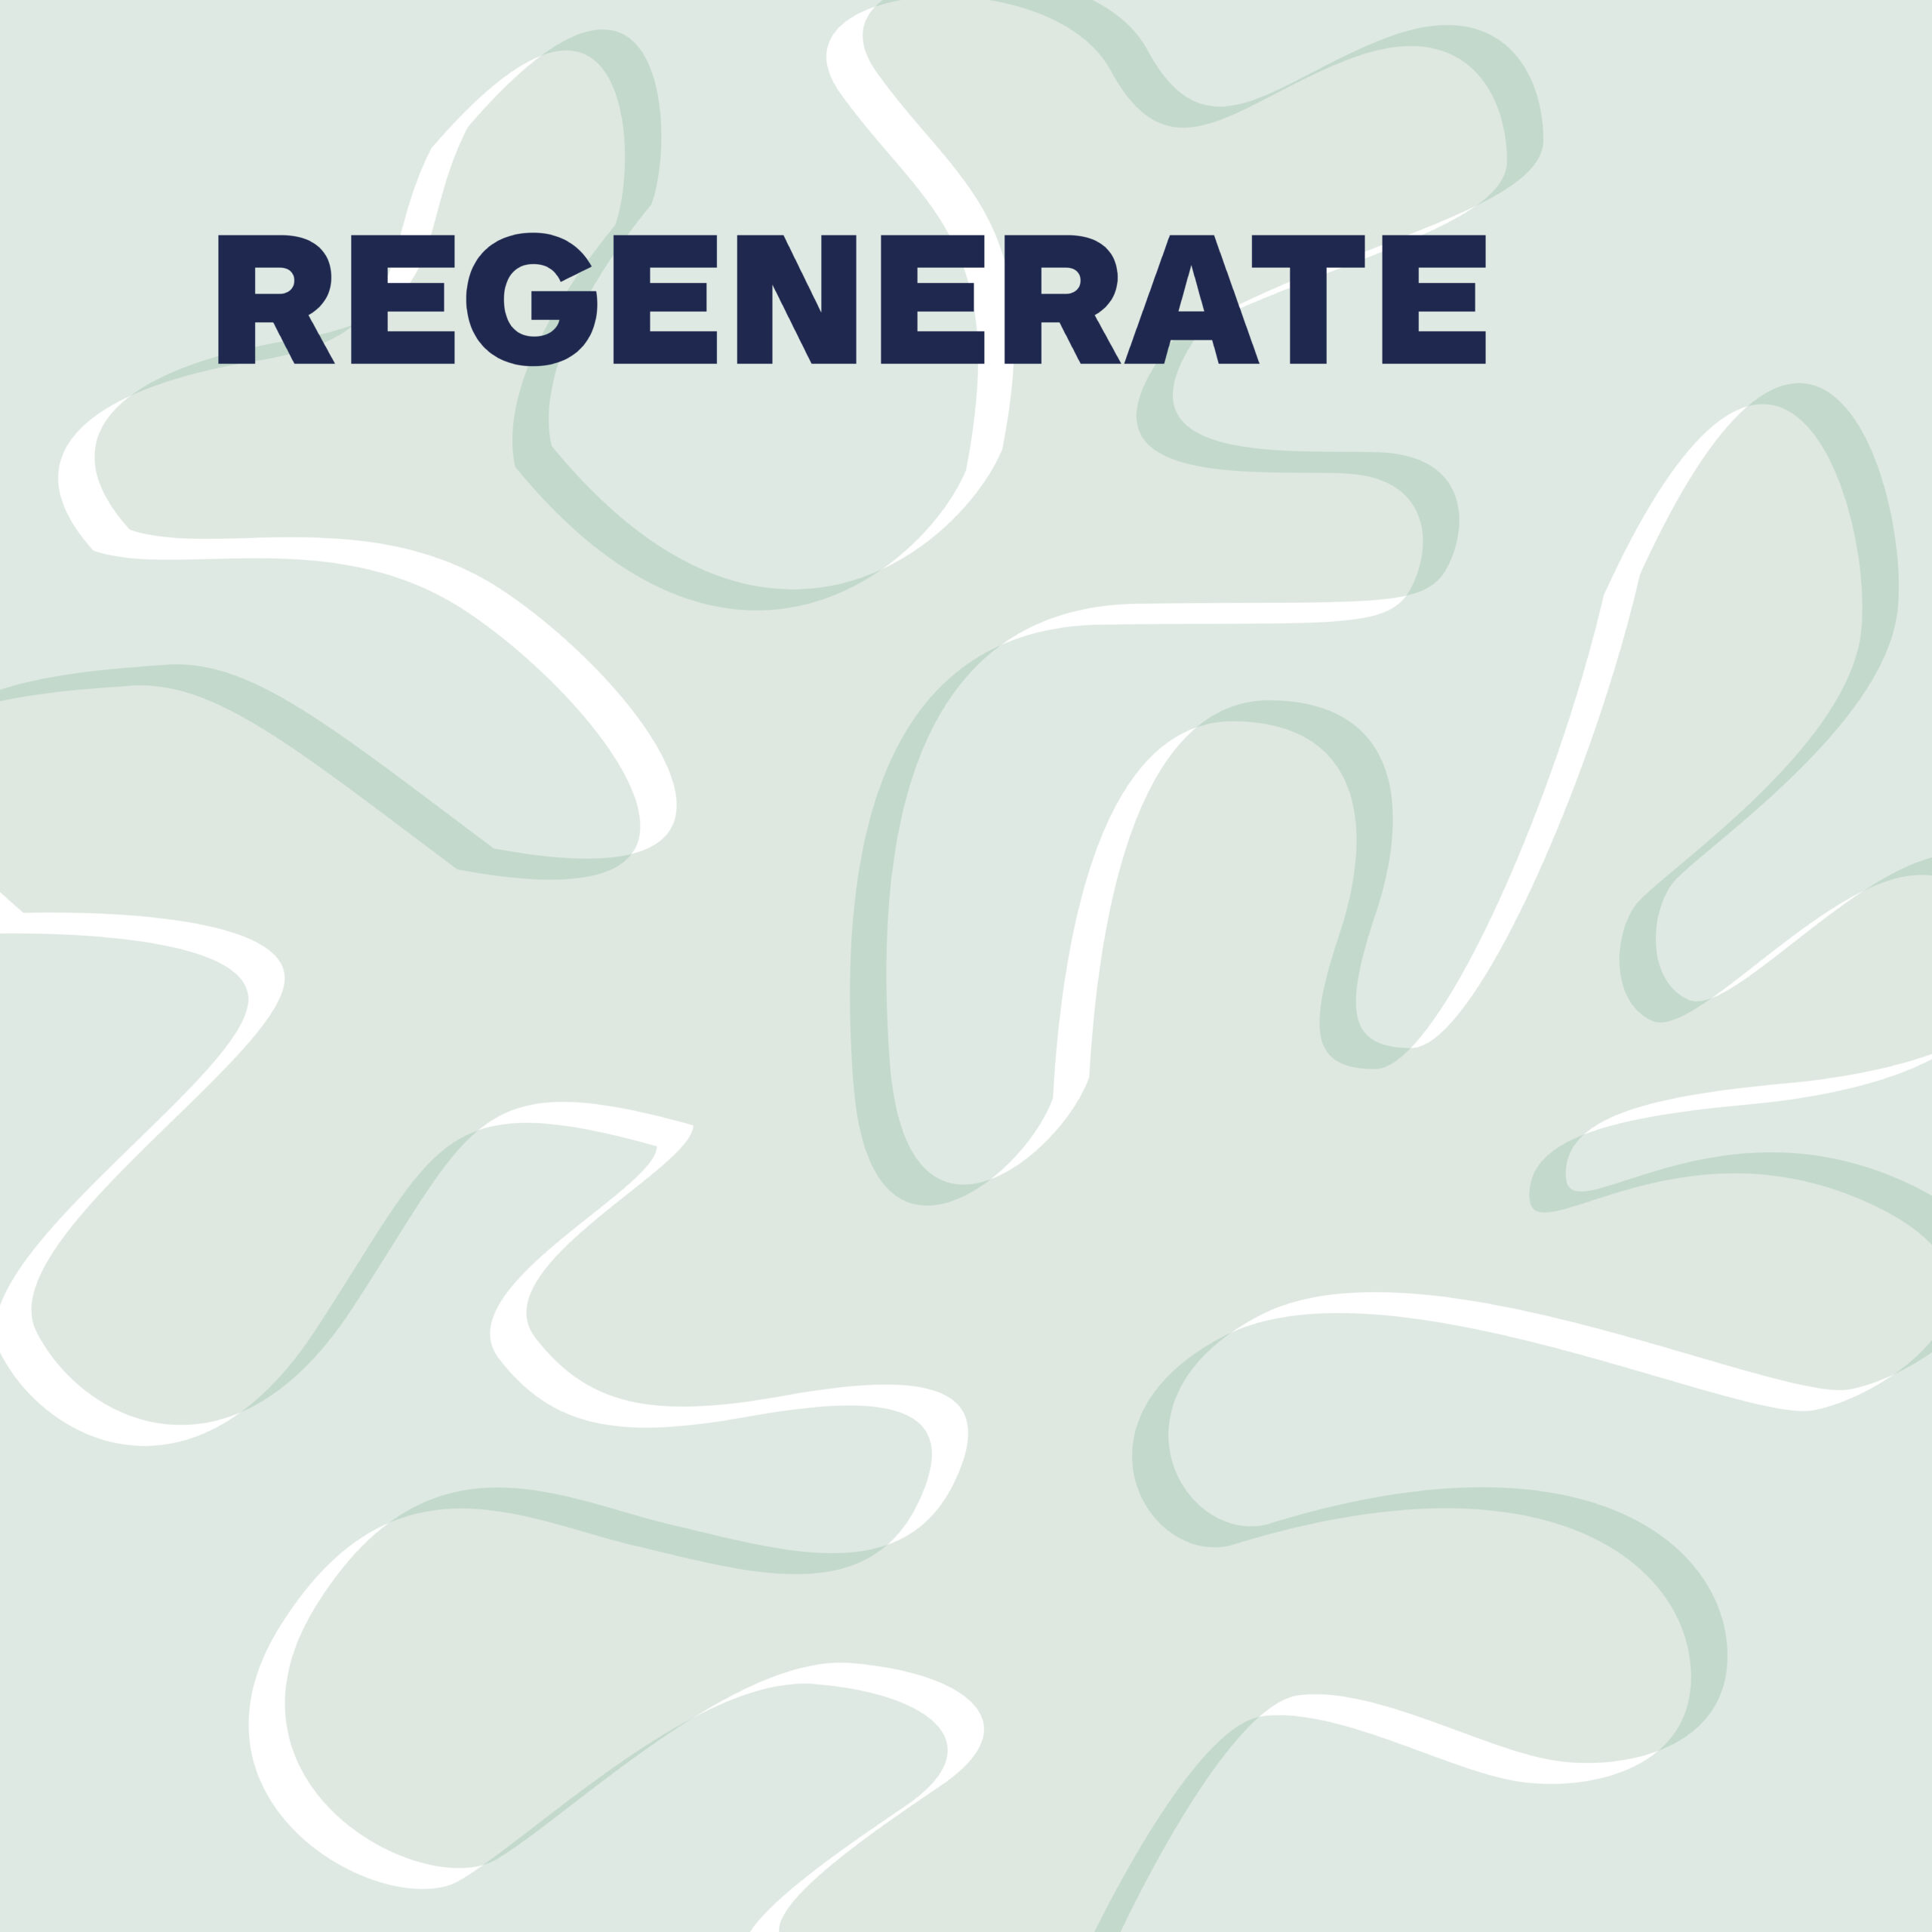 Regenerate: What the New Paradigm Means for Urban Development